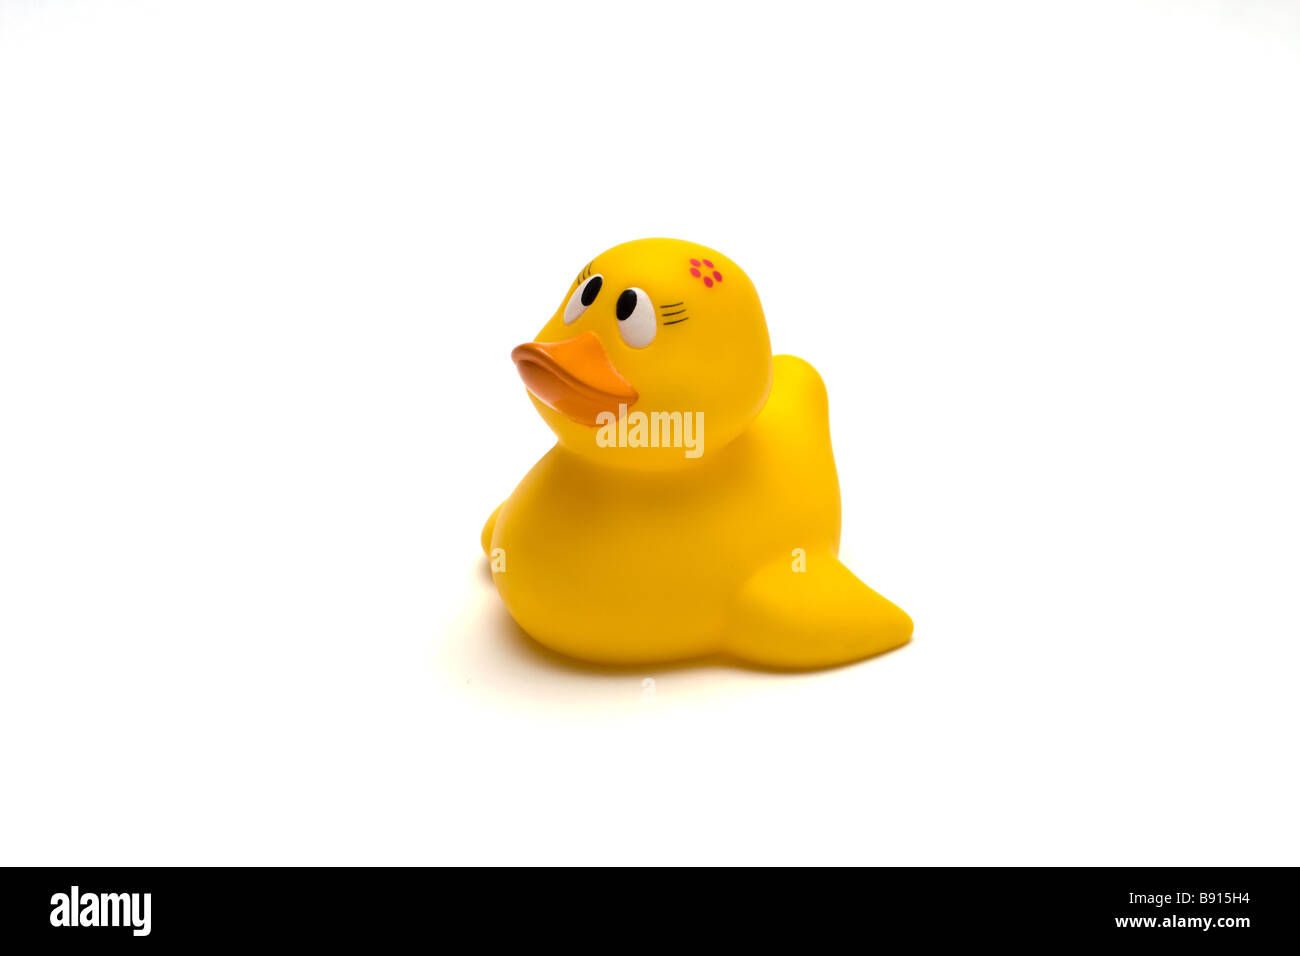 Rubber duck bath toy on a white background Stock Photo